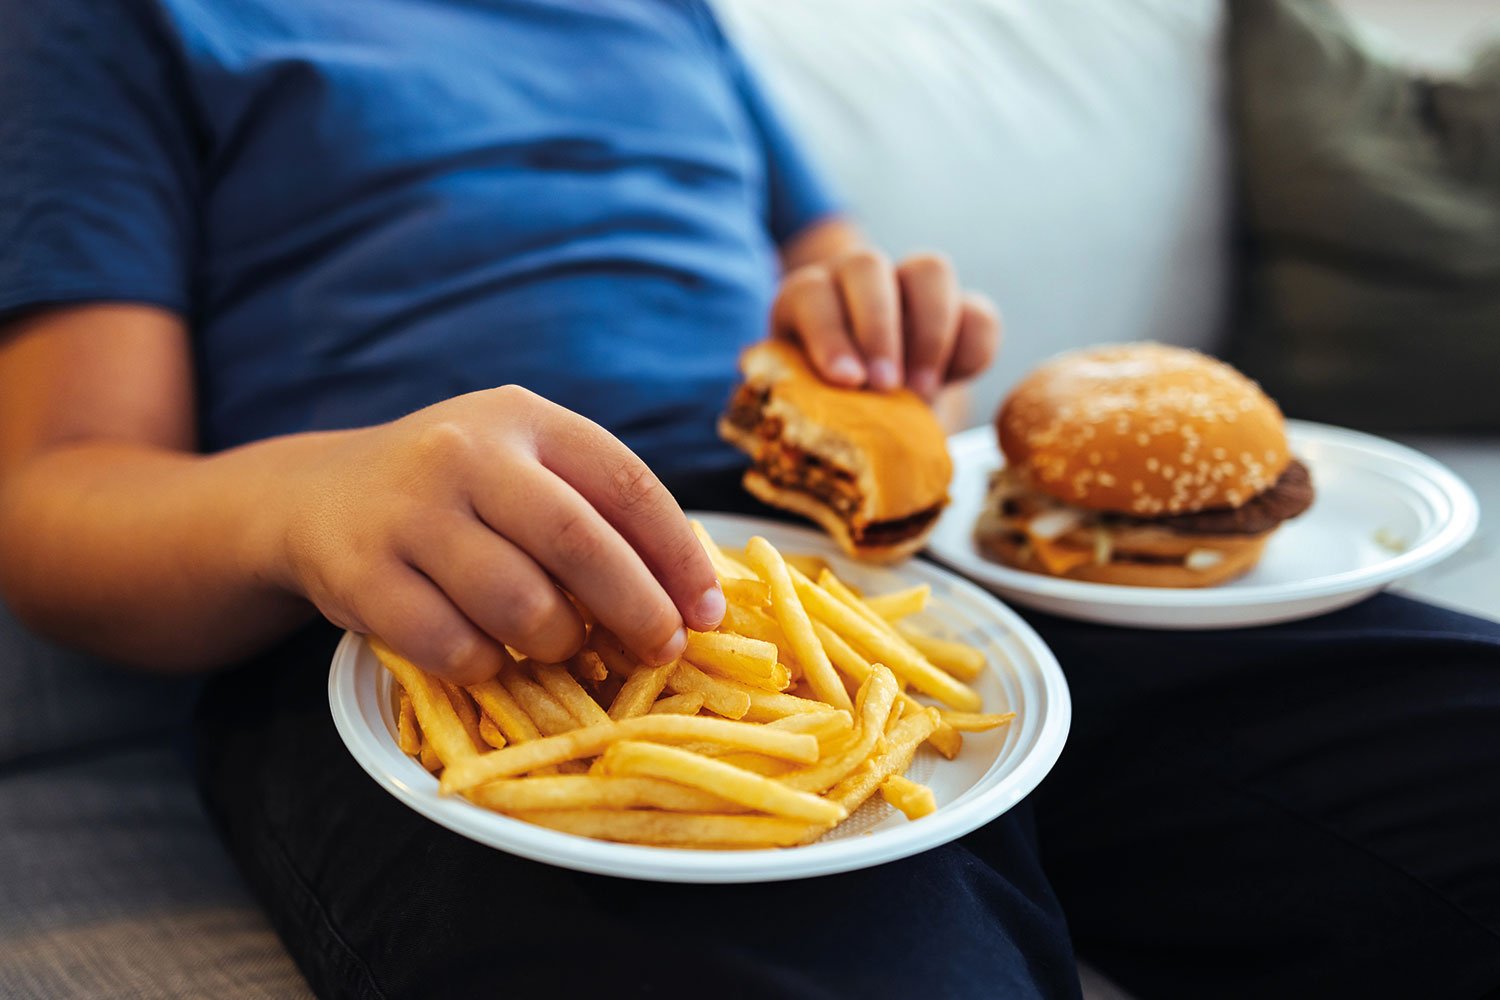 close-up of a boy’s hand picking chips off a plate, with a burger in his other hand